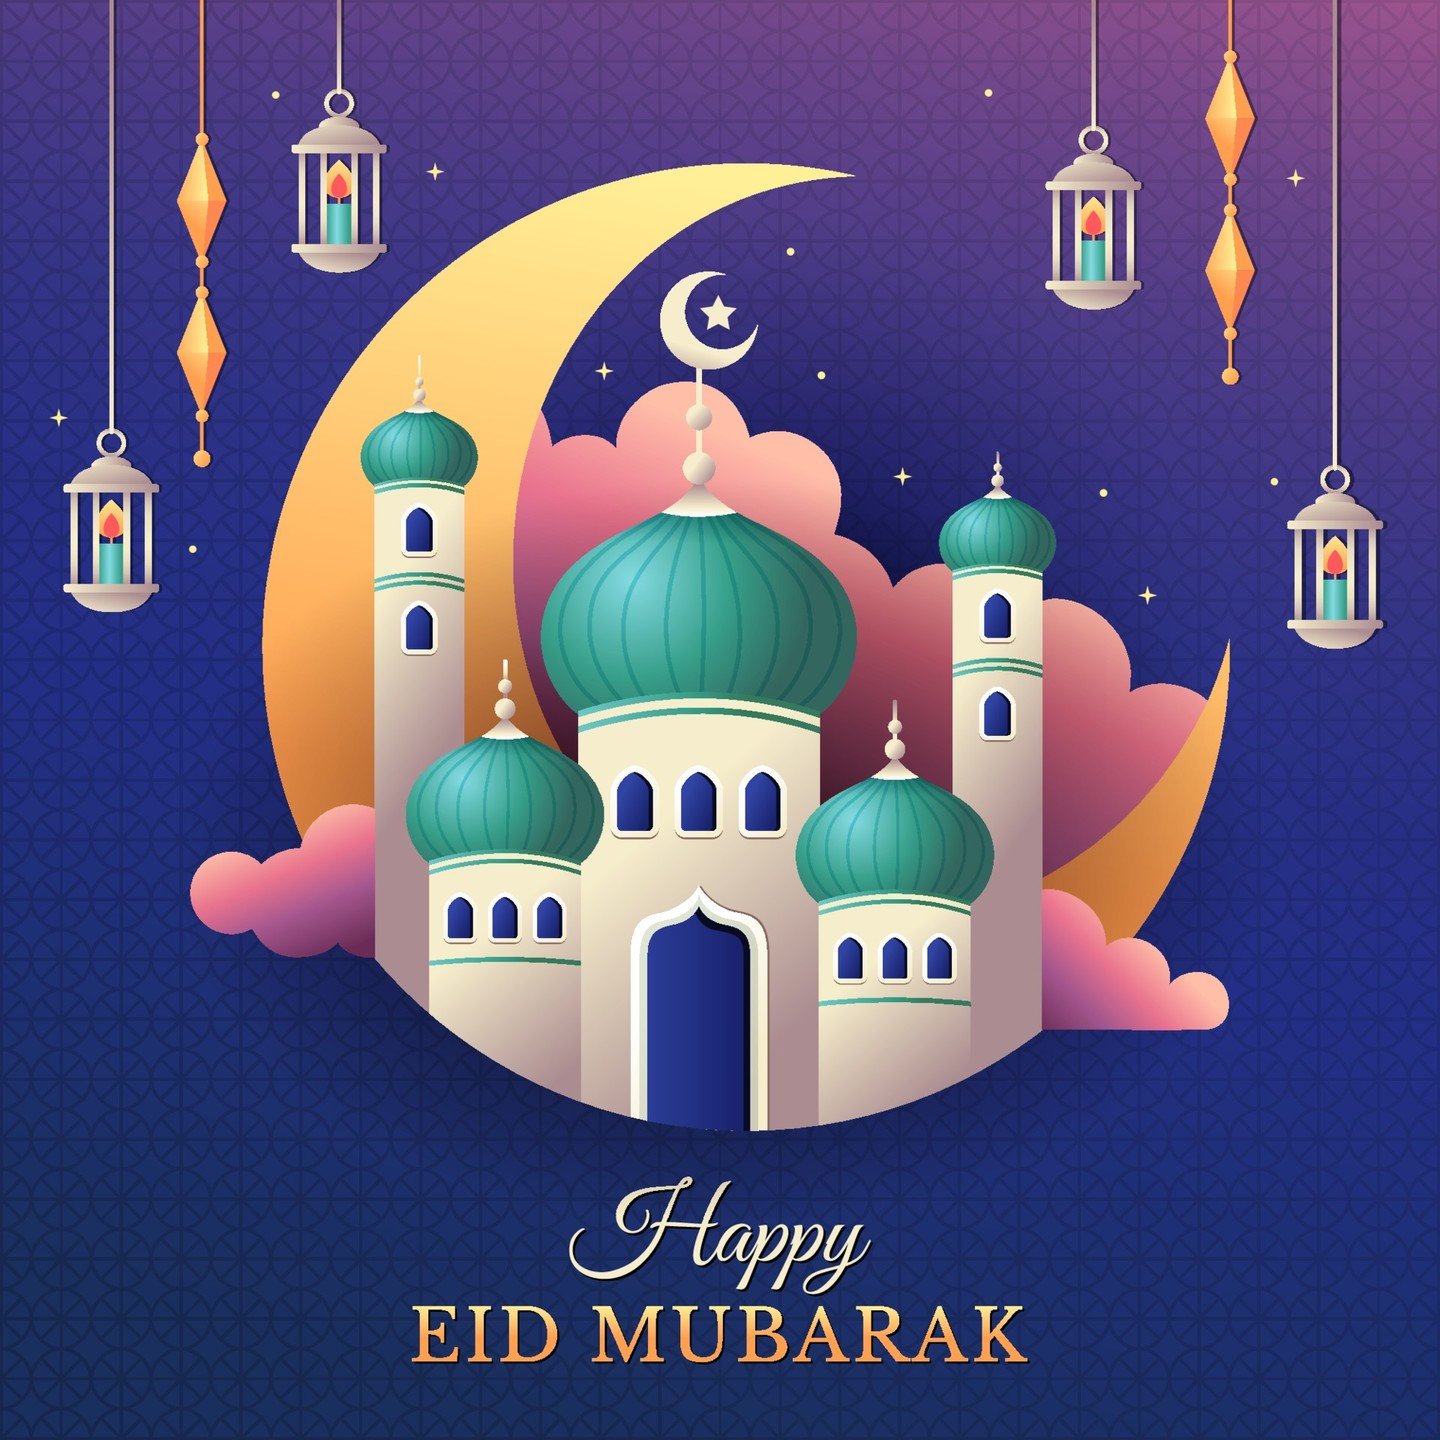 HAPPY EID MUBARAK to all our families who are celebrating today!

We hope you've have a great day and we can't wait to hear all about it when our projects start back up on Monday!

❤️❤️❤️